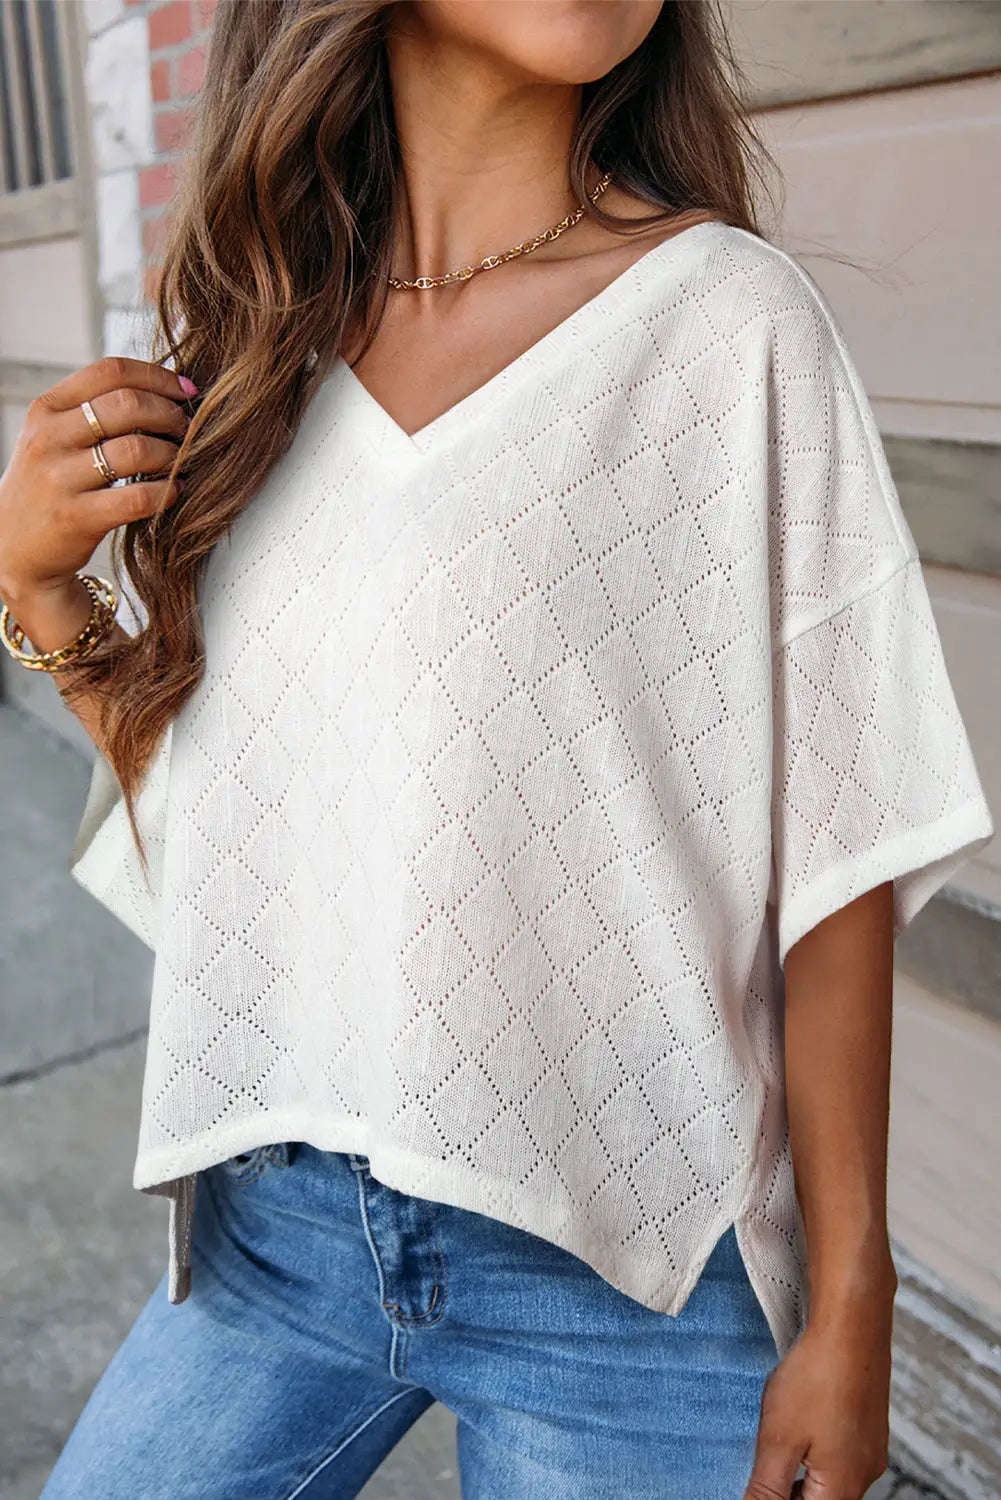 Green v neck knitted flowy blouse - white / l / 100% polyester - blouses & shirts